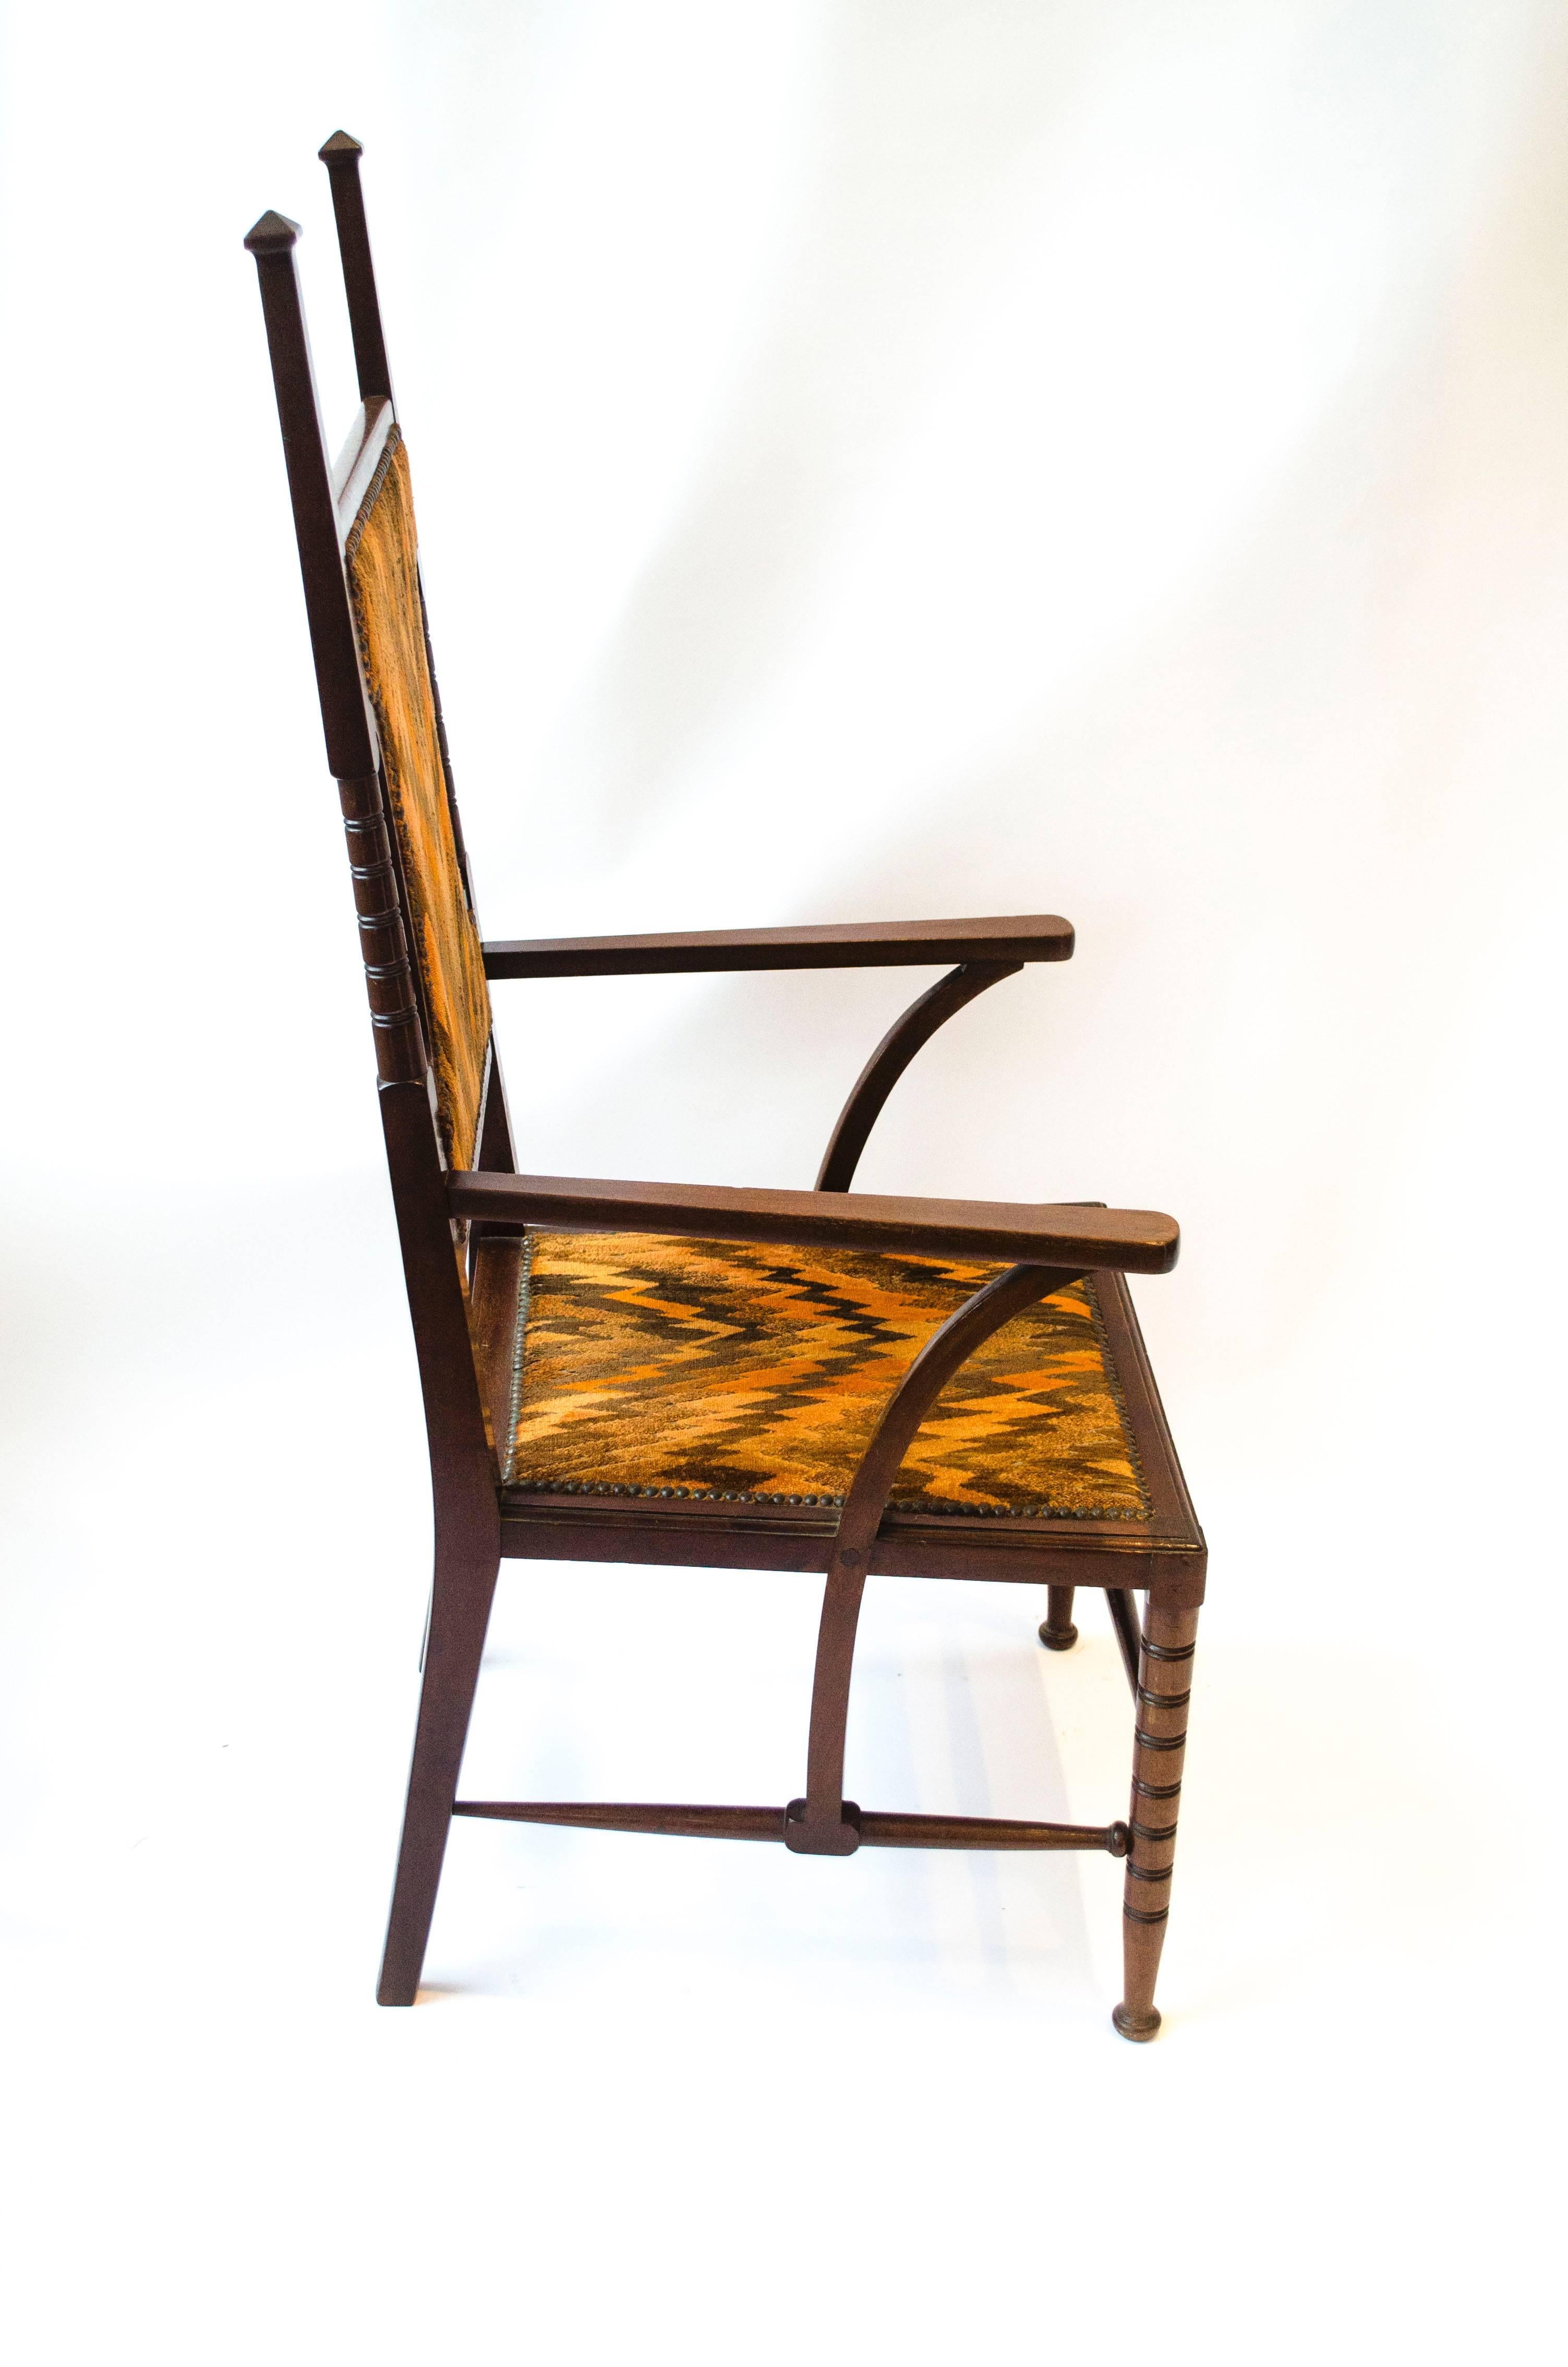 Liberty and Co. attributed. A good quality late Aesthetic Movement style Walnut high back armchair with square and turned supports, the arm supports continue down past the seat to meet the central square detail of the side stretchers, in turn, the